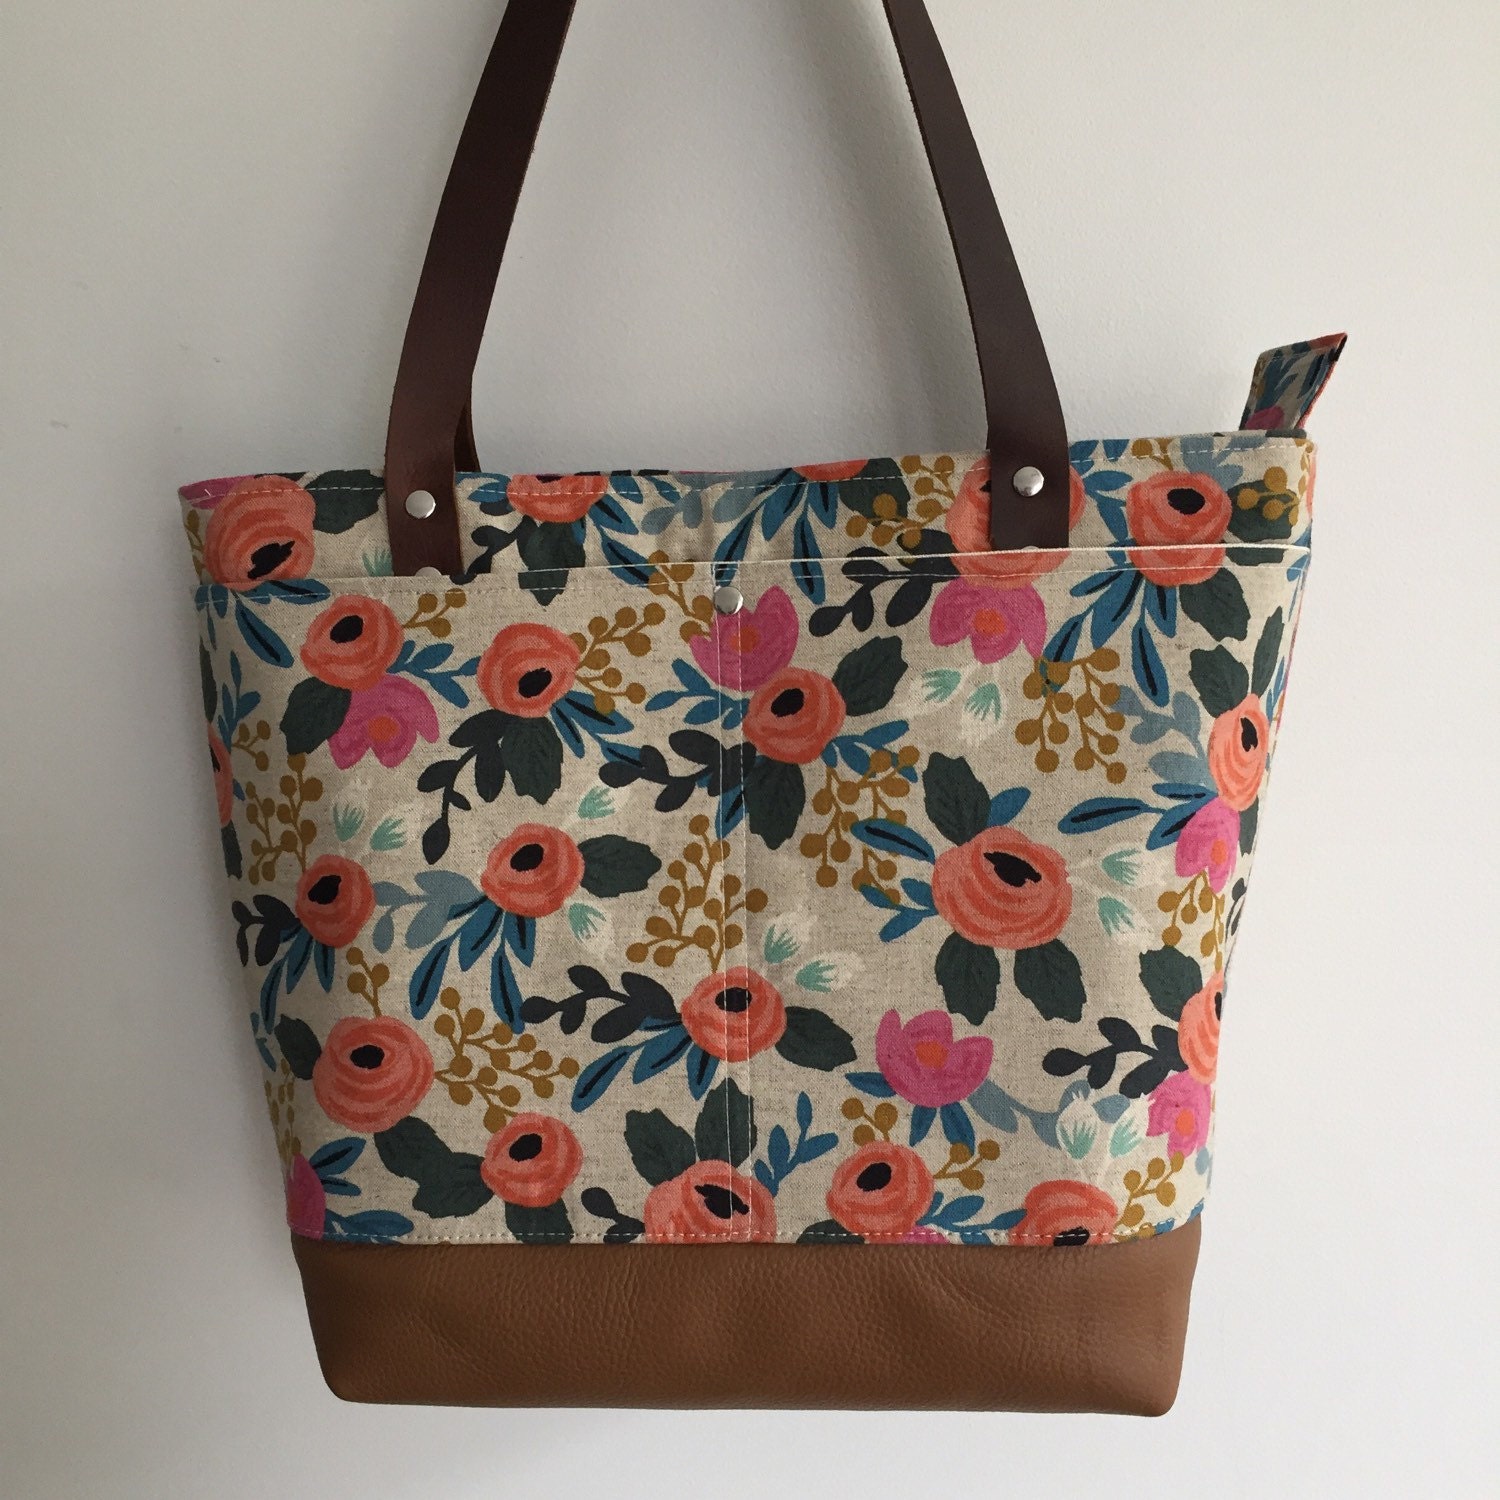 Rifle Paper Co tote bag floral tote leather tote les | Etsy